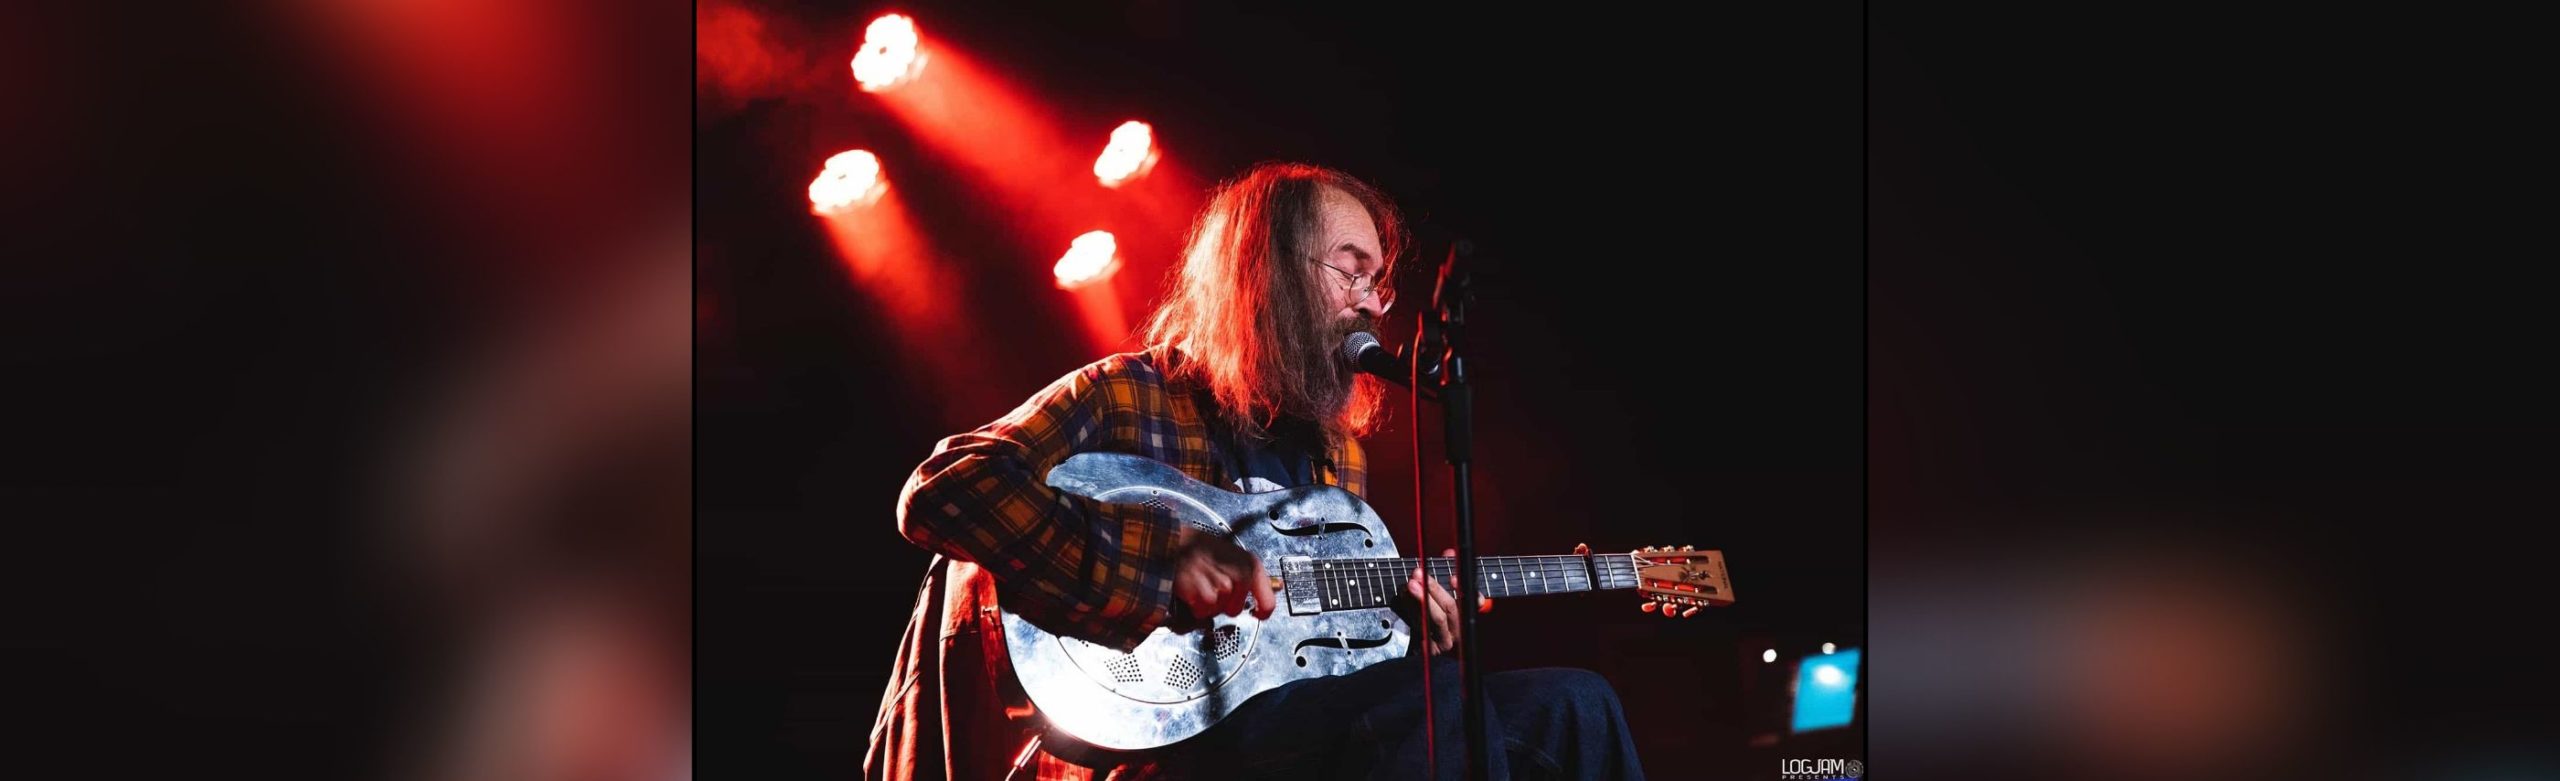 Event Info: Charlie Parr at the Top Hat 2019 Image